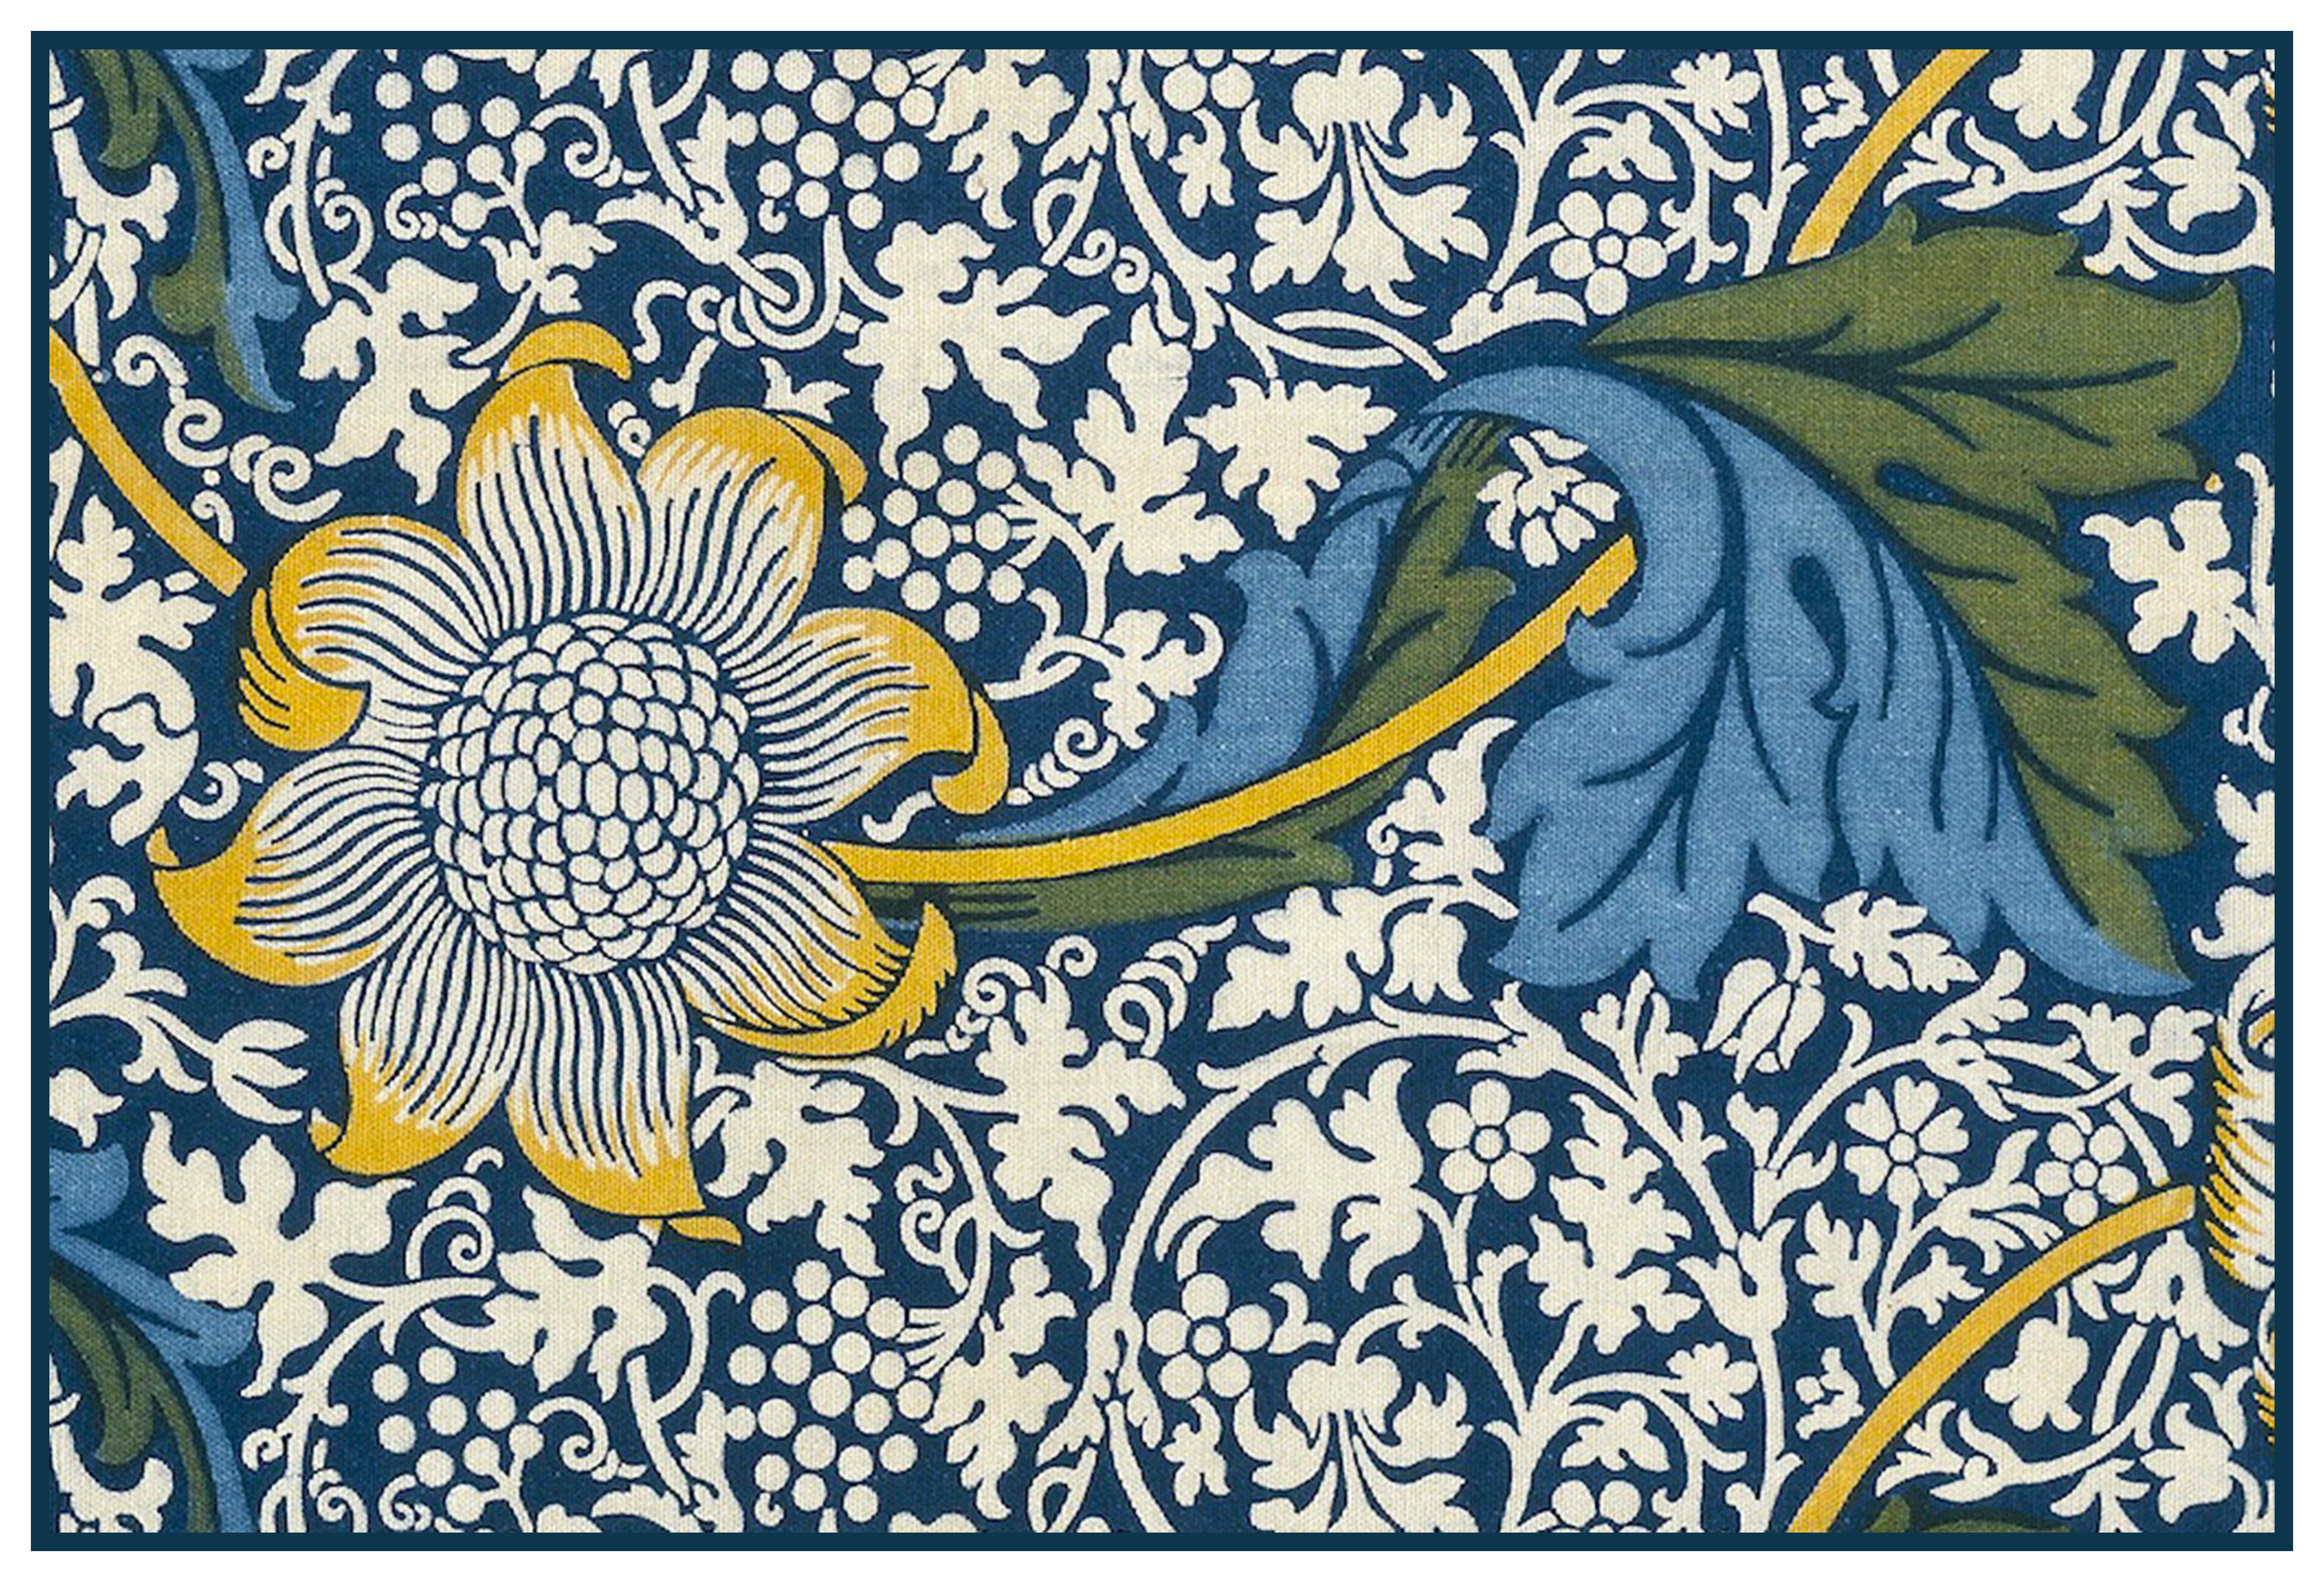 Arts and crafts movement